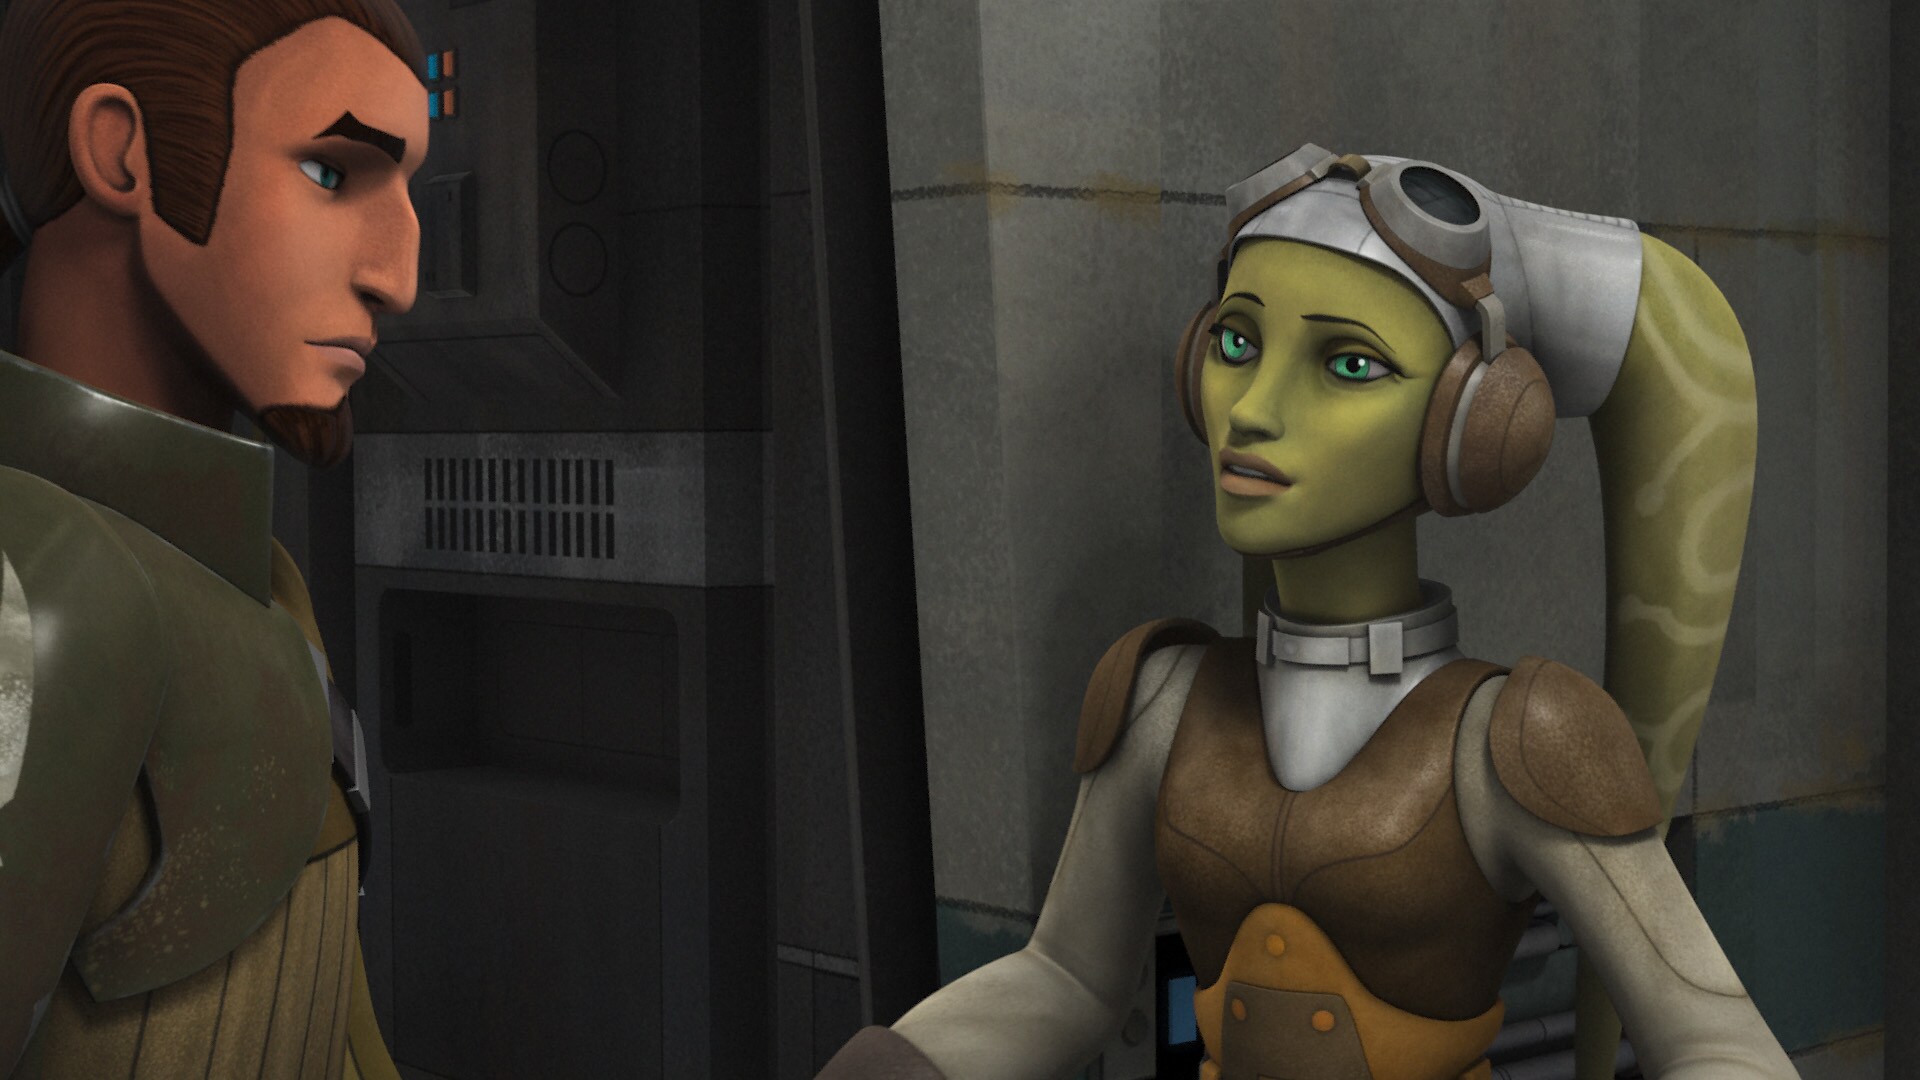 While Kanan is unsure that this test will work, Hera implores him to help Ezra.